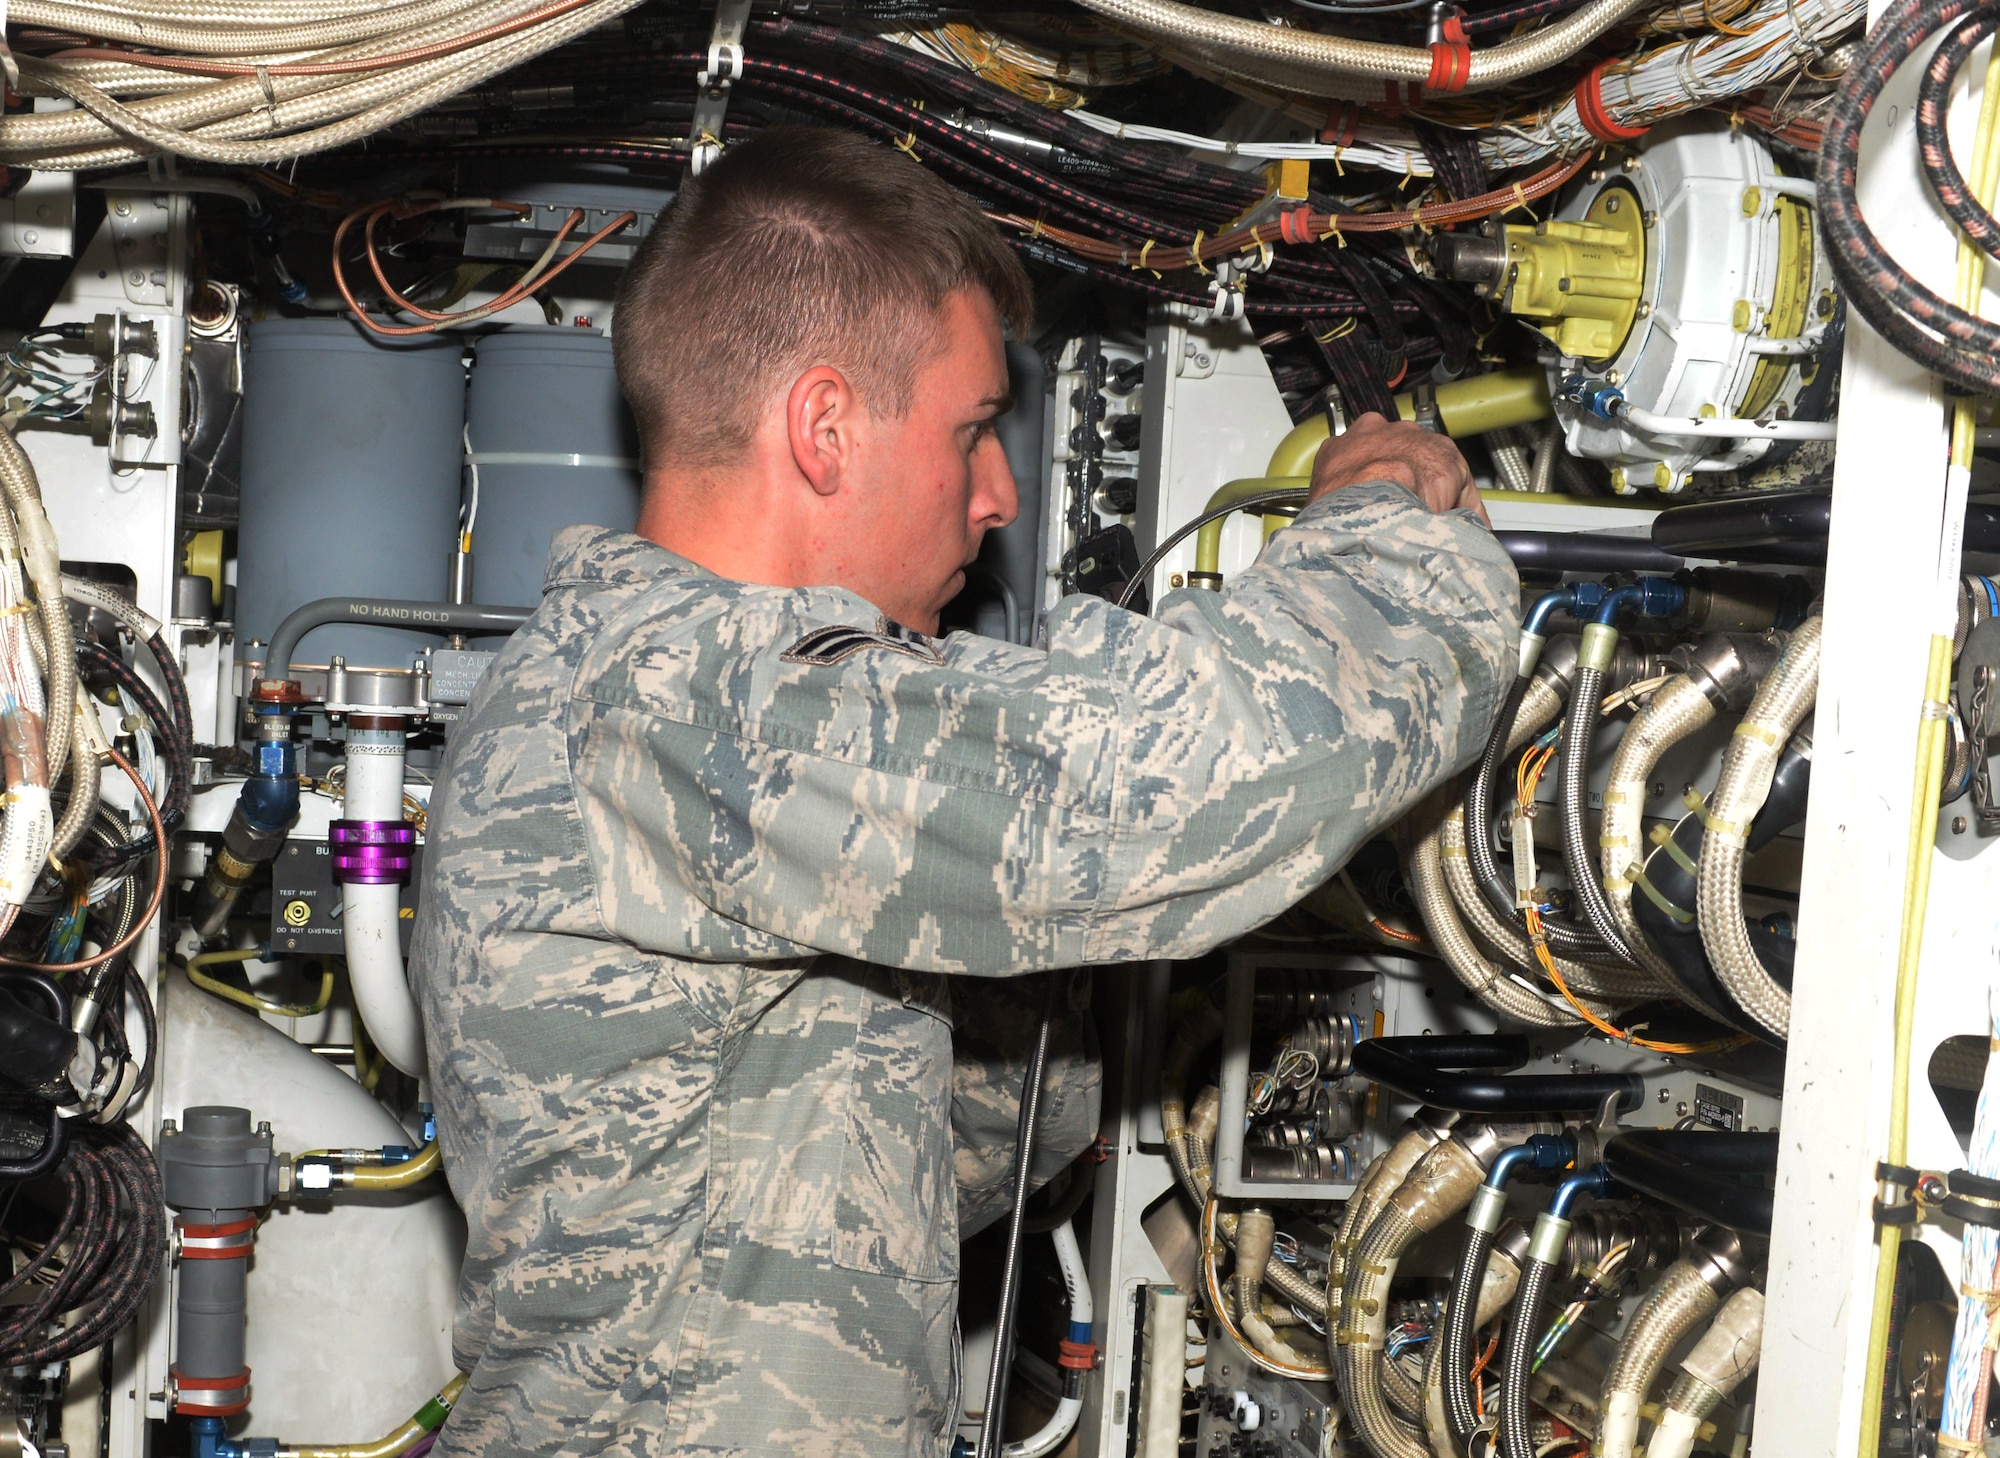 Airman 1st Class Justin Bussell, an aerospace propulsion technician assigned to the 28th Aircraft Maintenance Squadron, repairs cables inside a B-1 Bomber at Ellsworth Air Force Base, S.D., Oct. 17, 2017. Bussell and the other maintainers had to ensure the aircraft leaving for Green Flag 18-1 were at their peak performance. (U.S. Air Force photo by Airman 1st Class Thomas Karol)